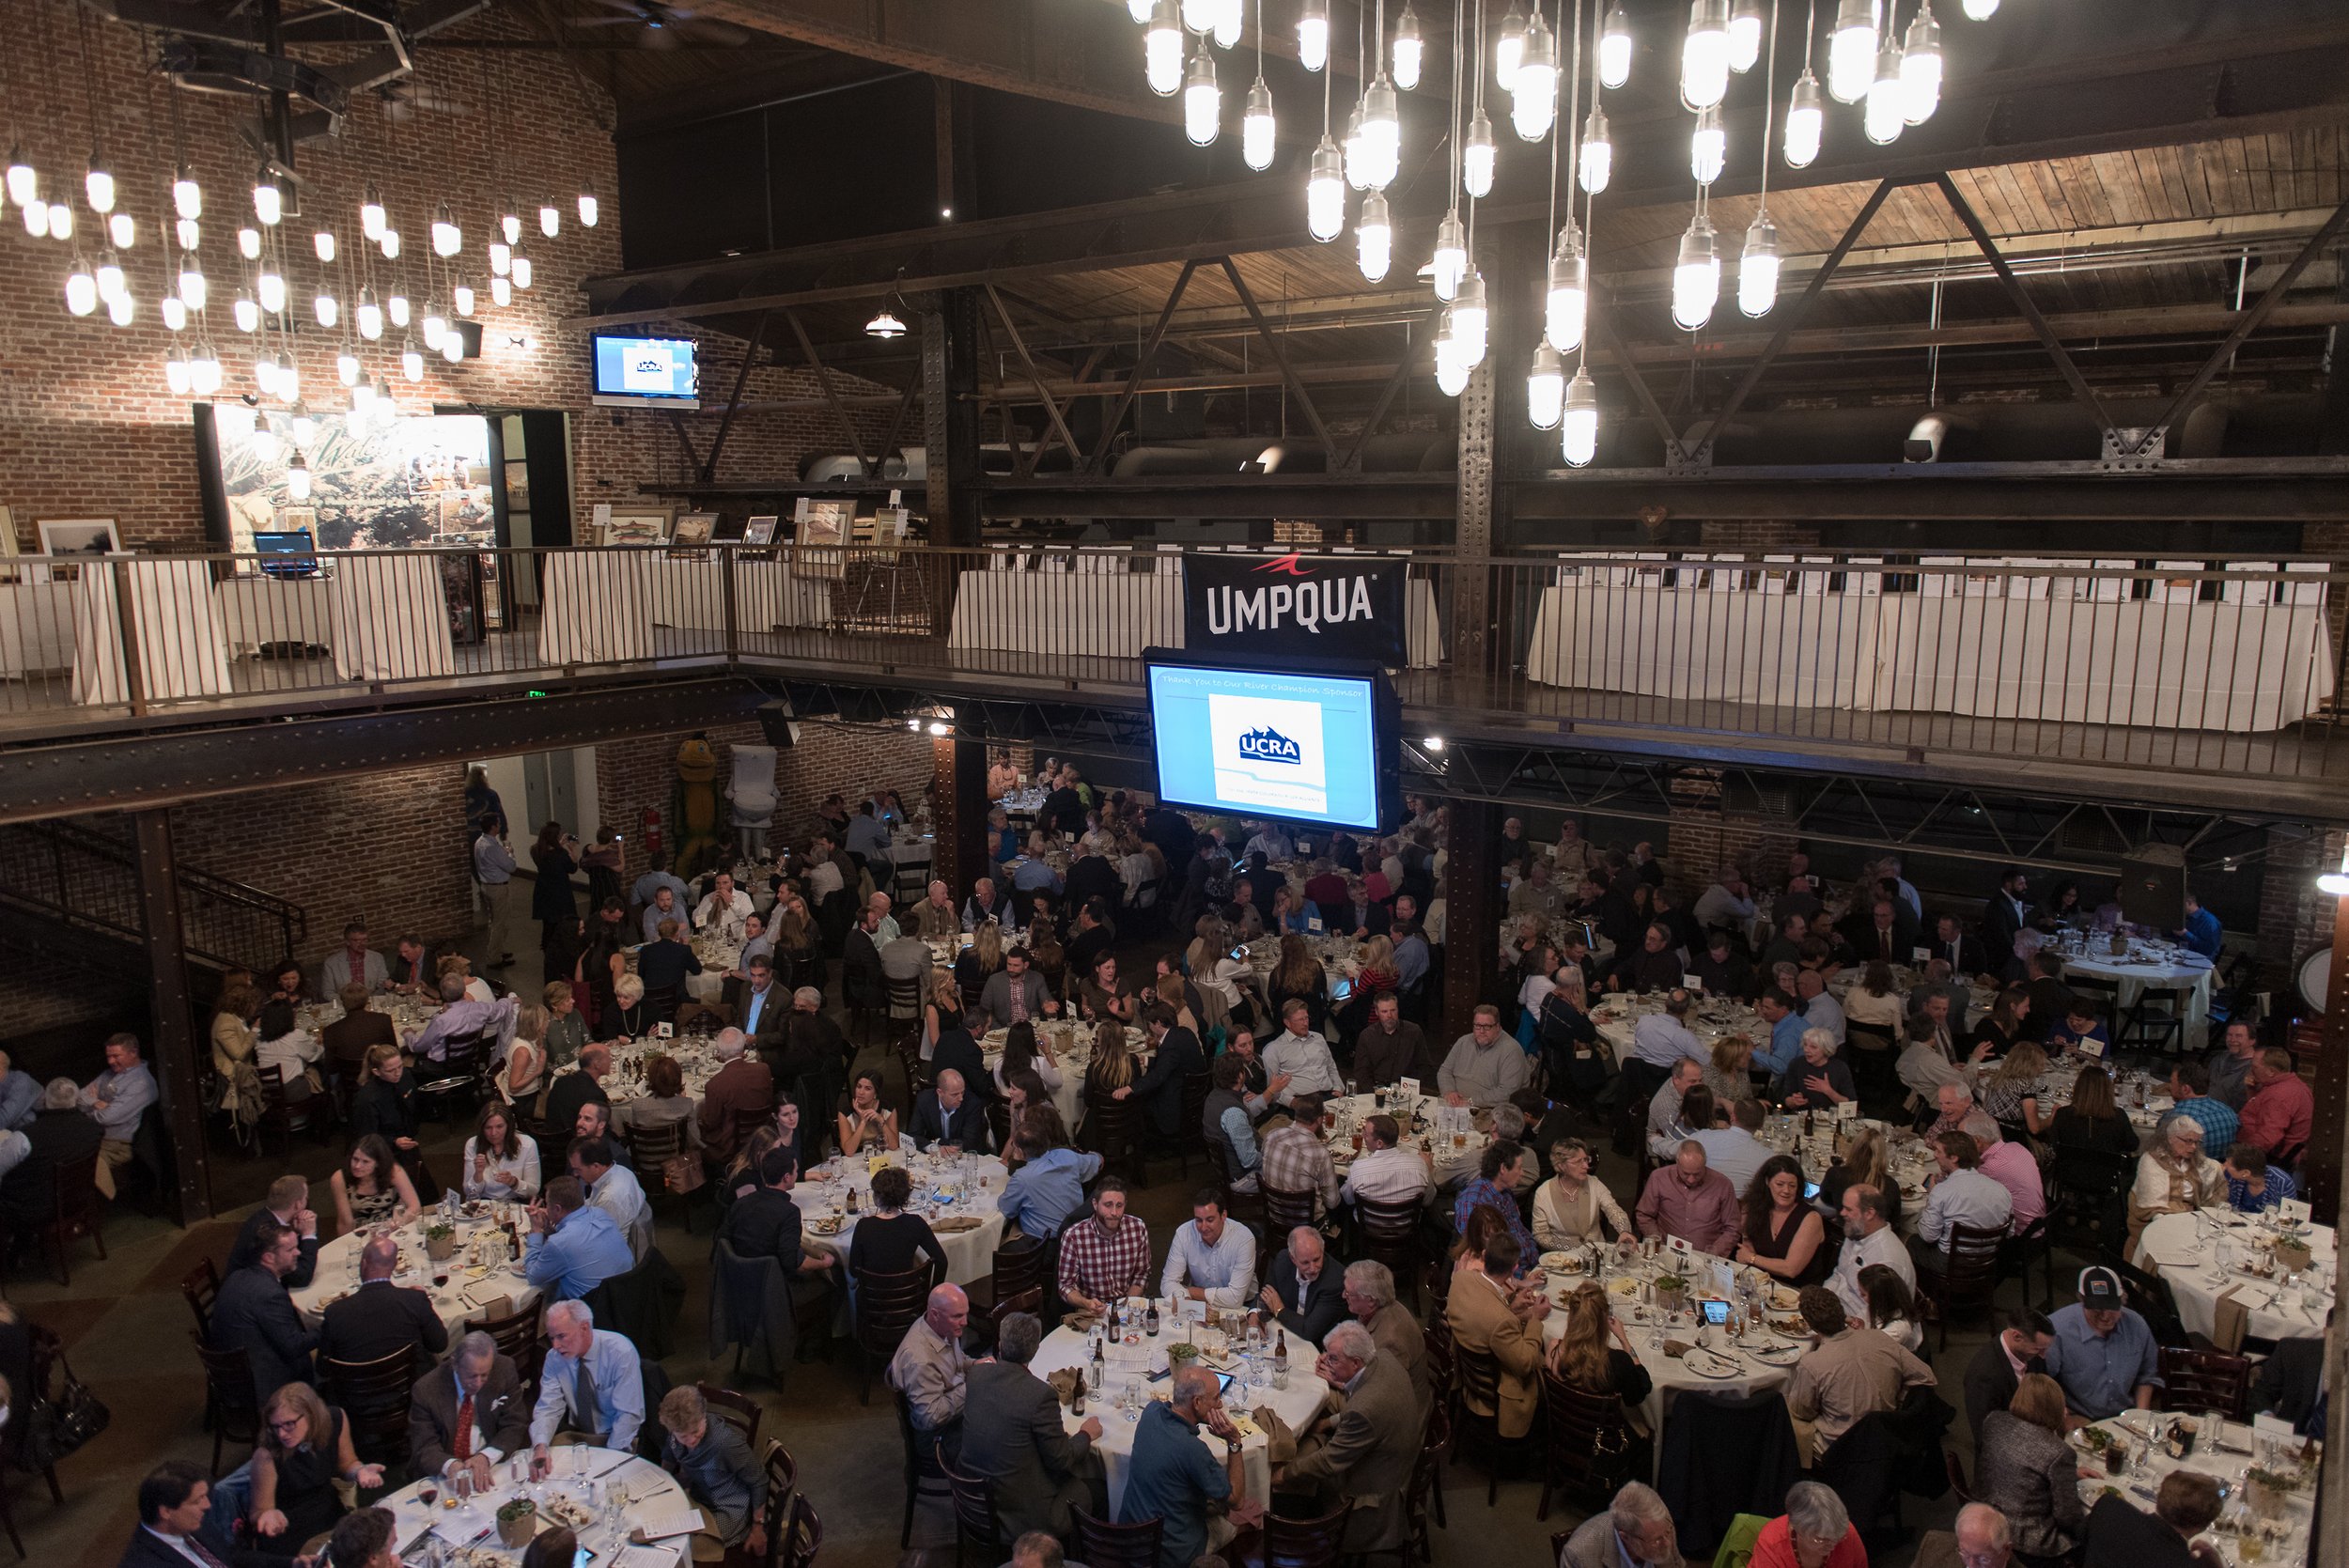  2016 MAR 10: The annual Colorado Trout Unlimited River Stewardship Gala held at Mile High Station in Denver, CO. 